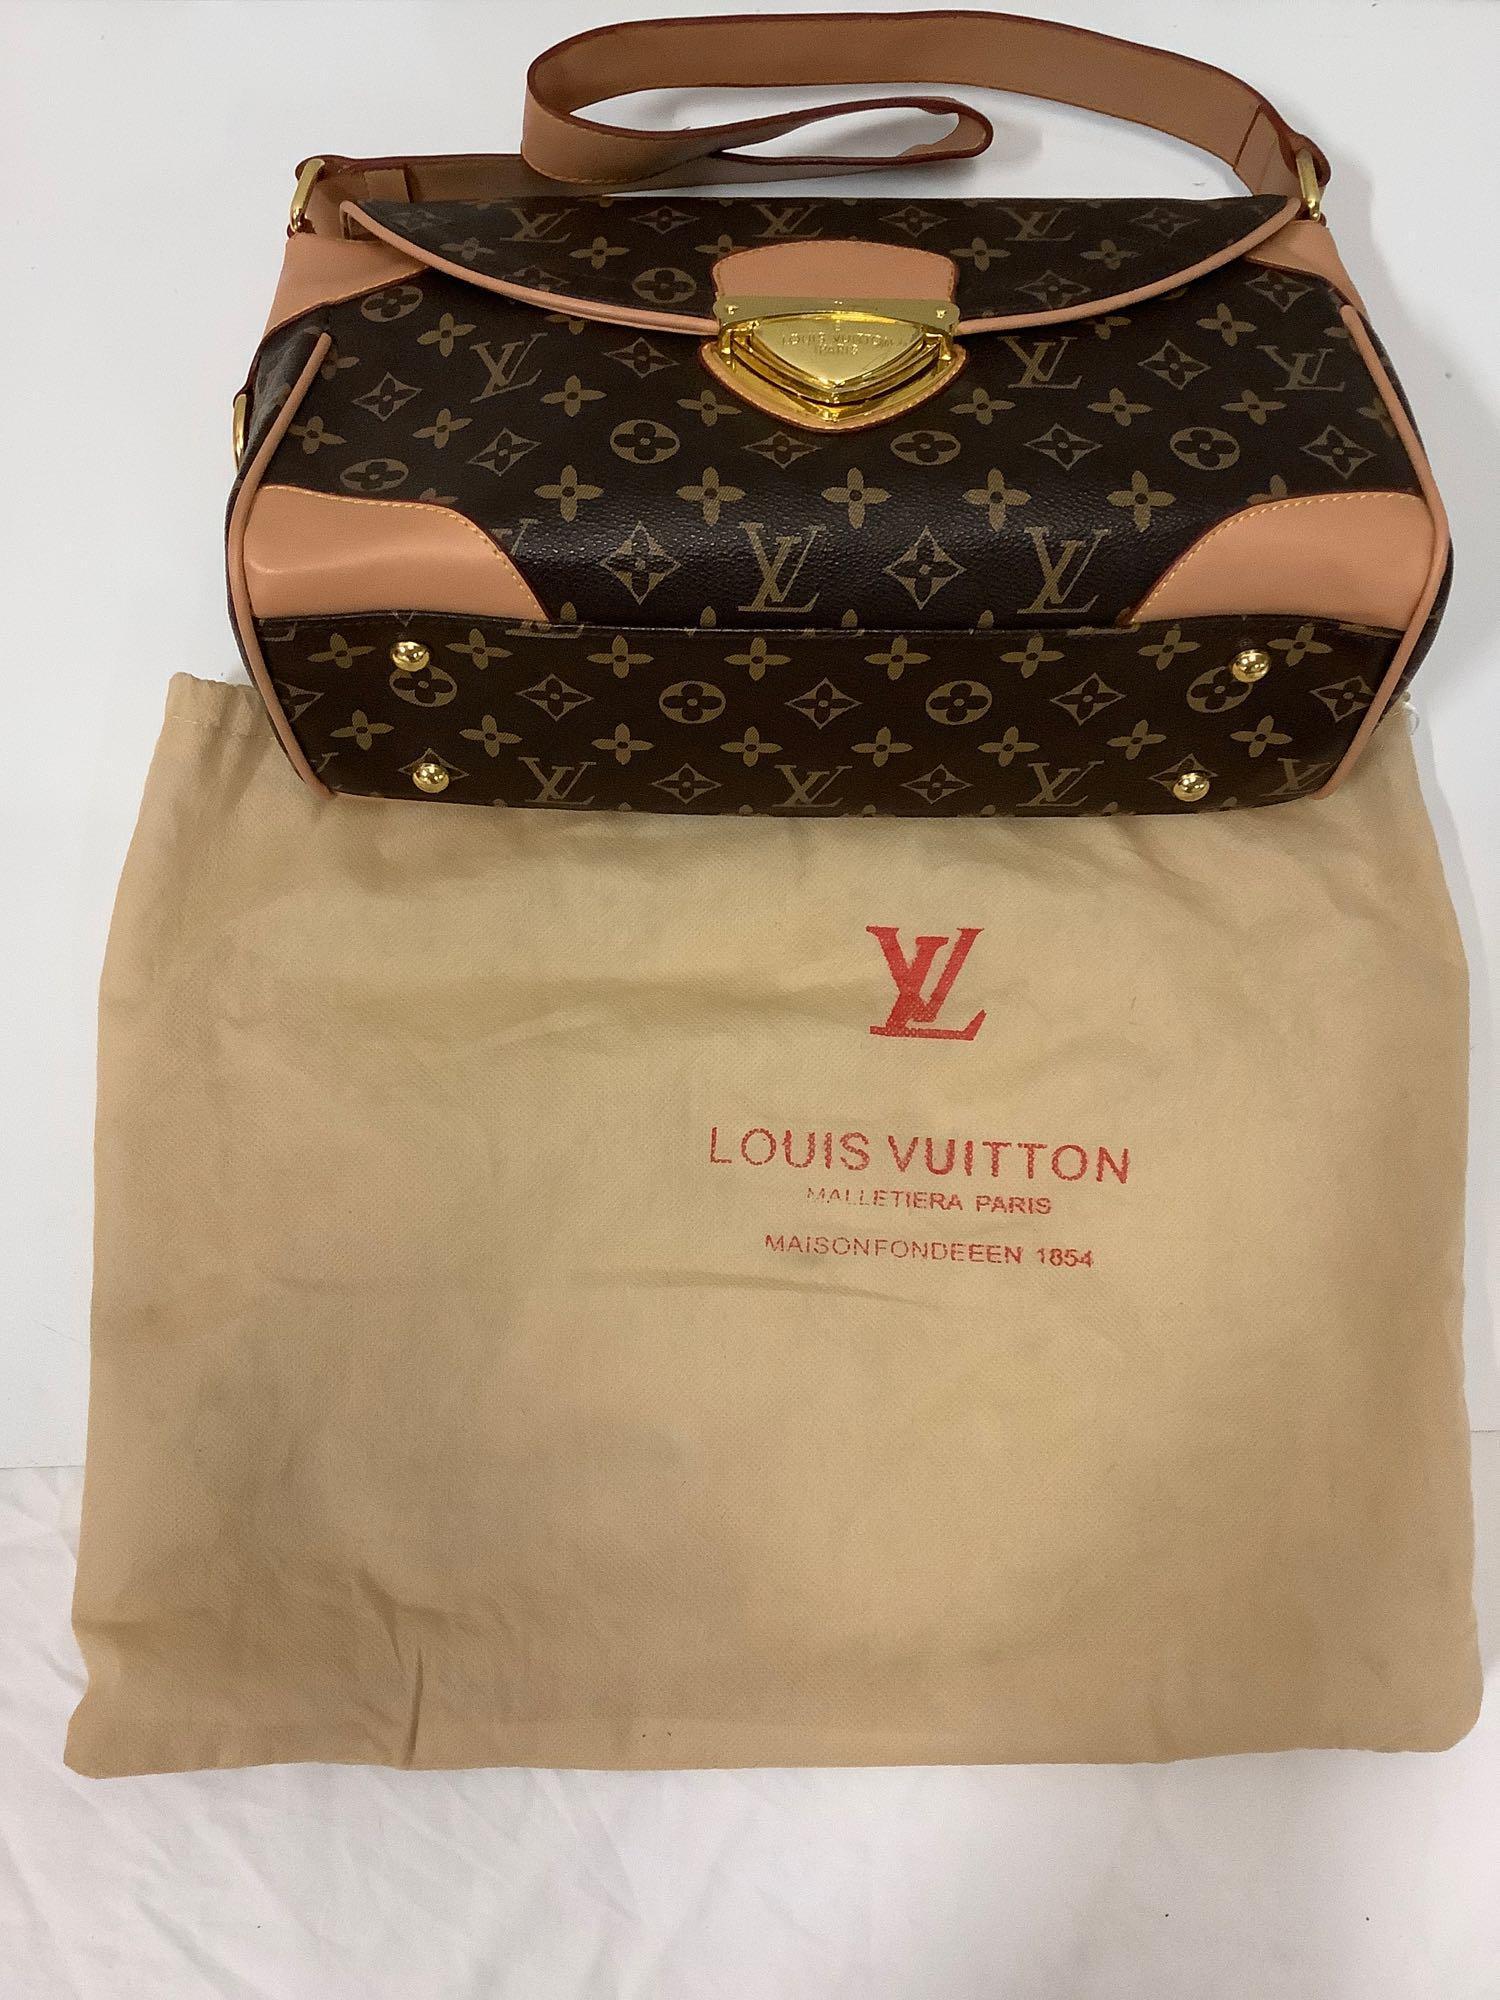 Louis Vuitton style reproduction handbag w/ cover, made in France, approx. 13 x 7 x 5 inches.